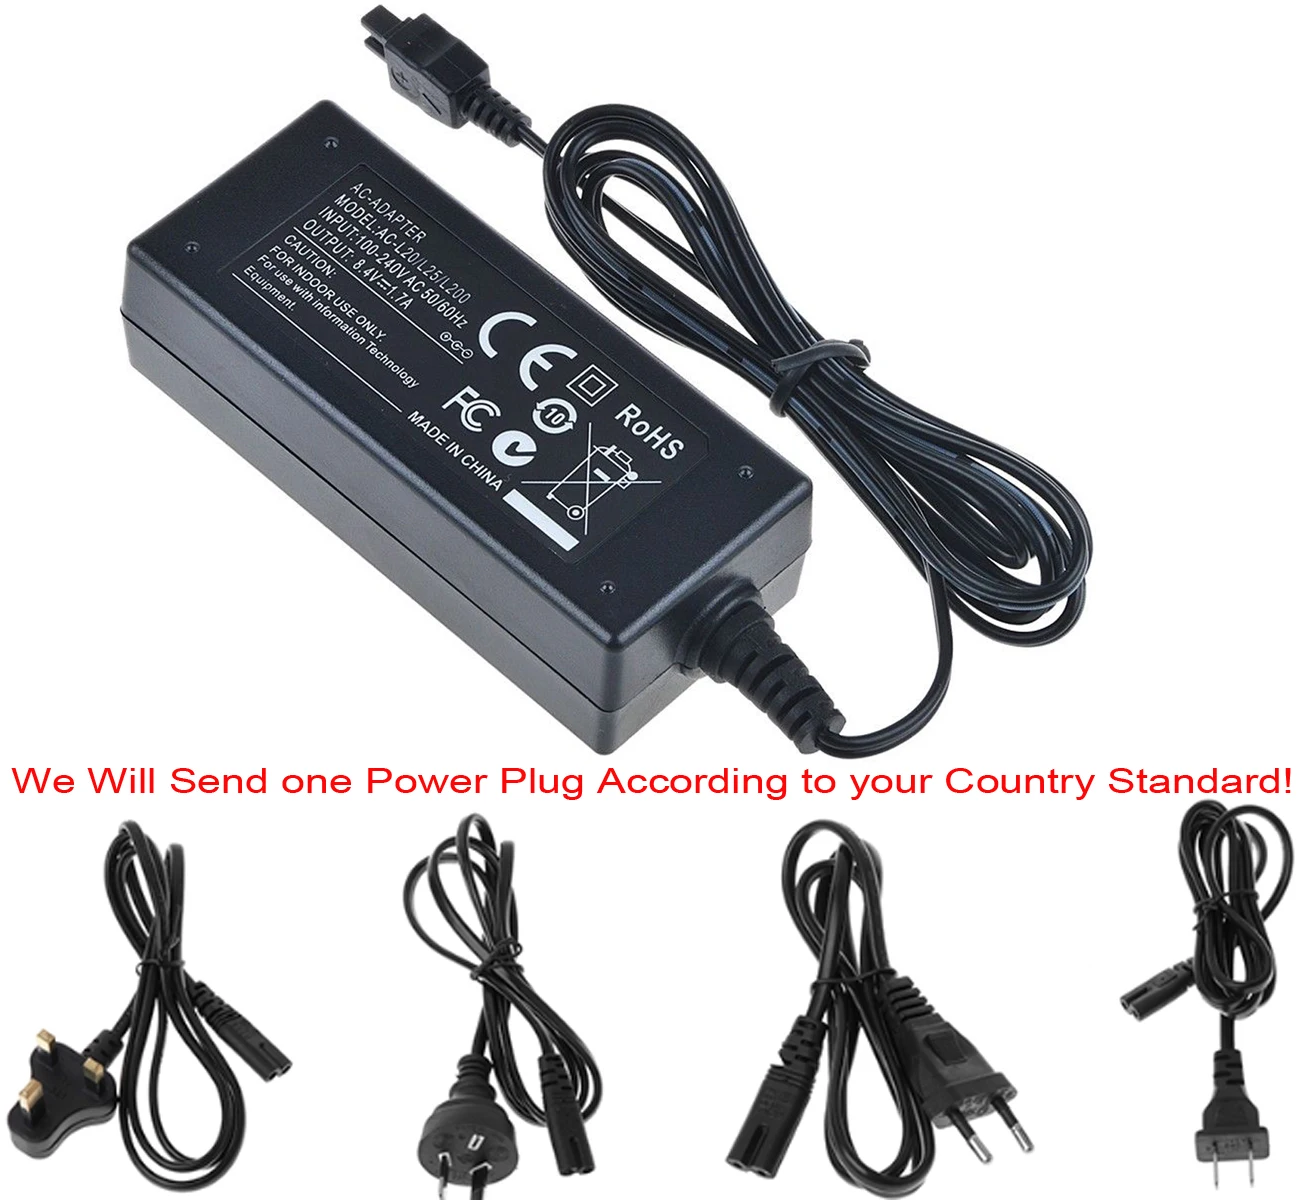 

AC Power Adapter Charger for Sony DCR-DVD304E, DCR-DVD305E, DCR-DVD306E, DCR-DVD308E, DCR-DVD310E DVD Handycam Camcorder